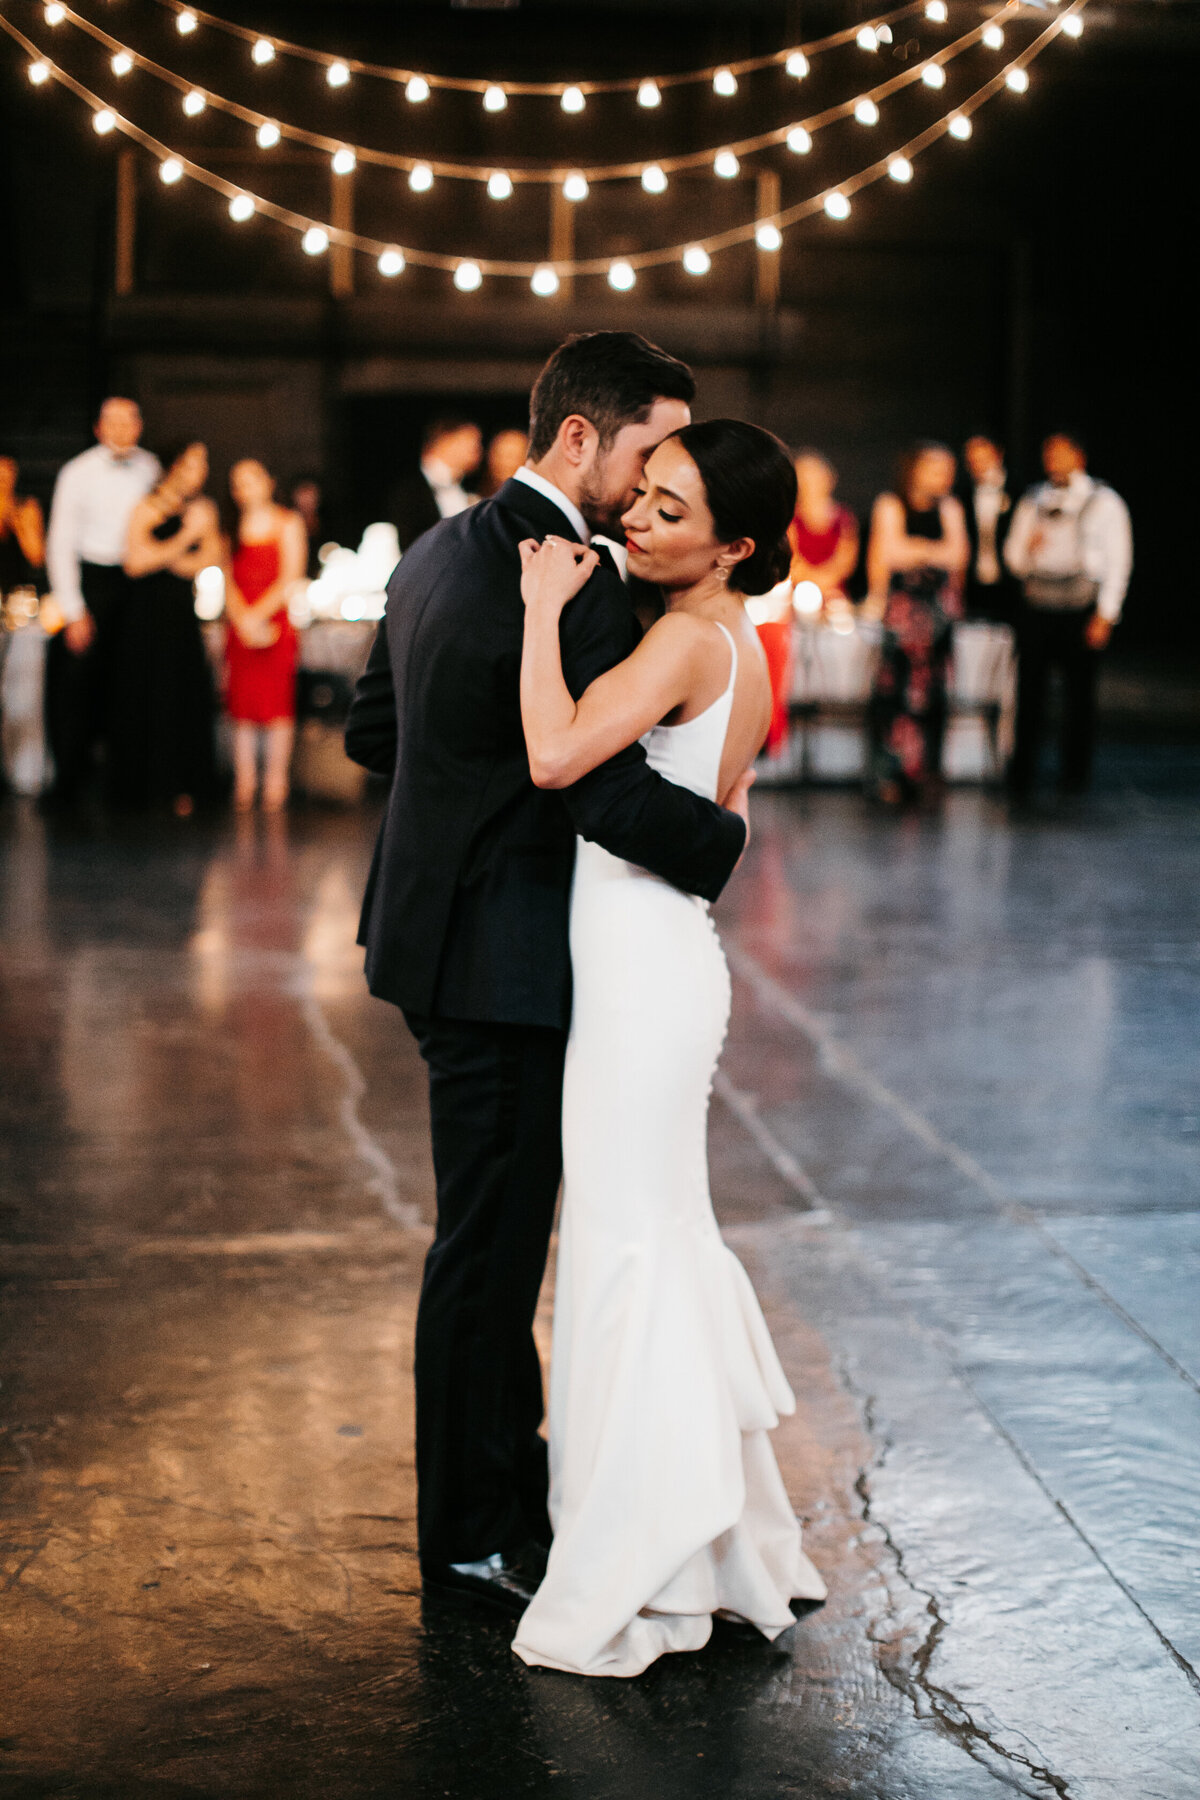 bride and groom first dance at reception under string lights